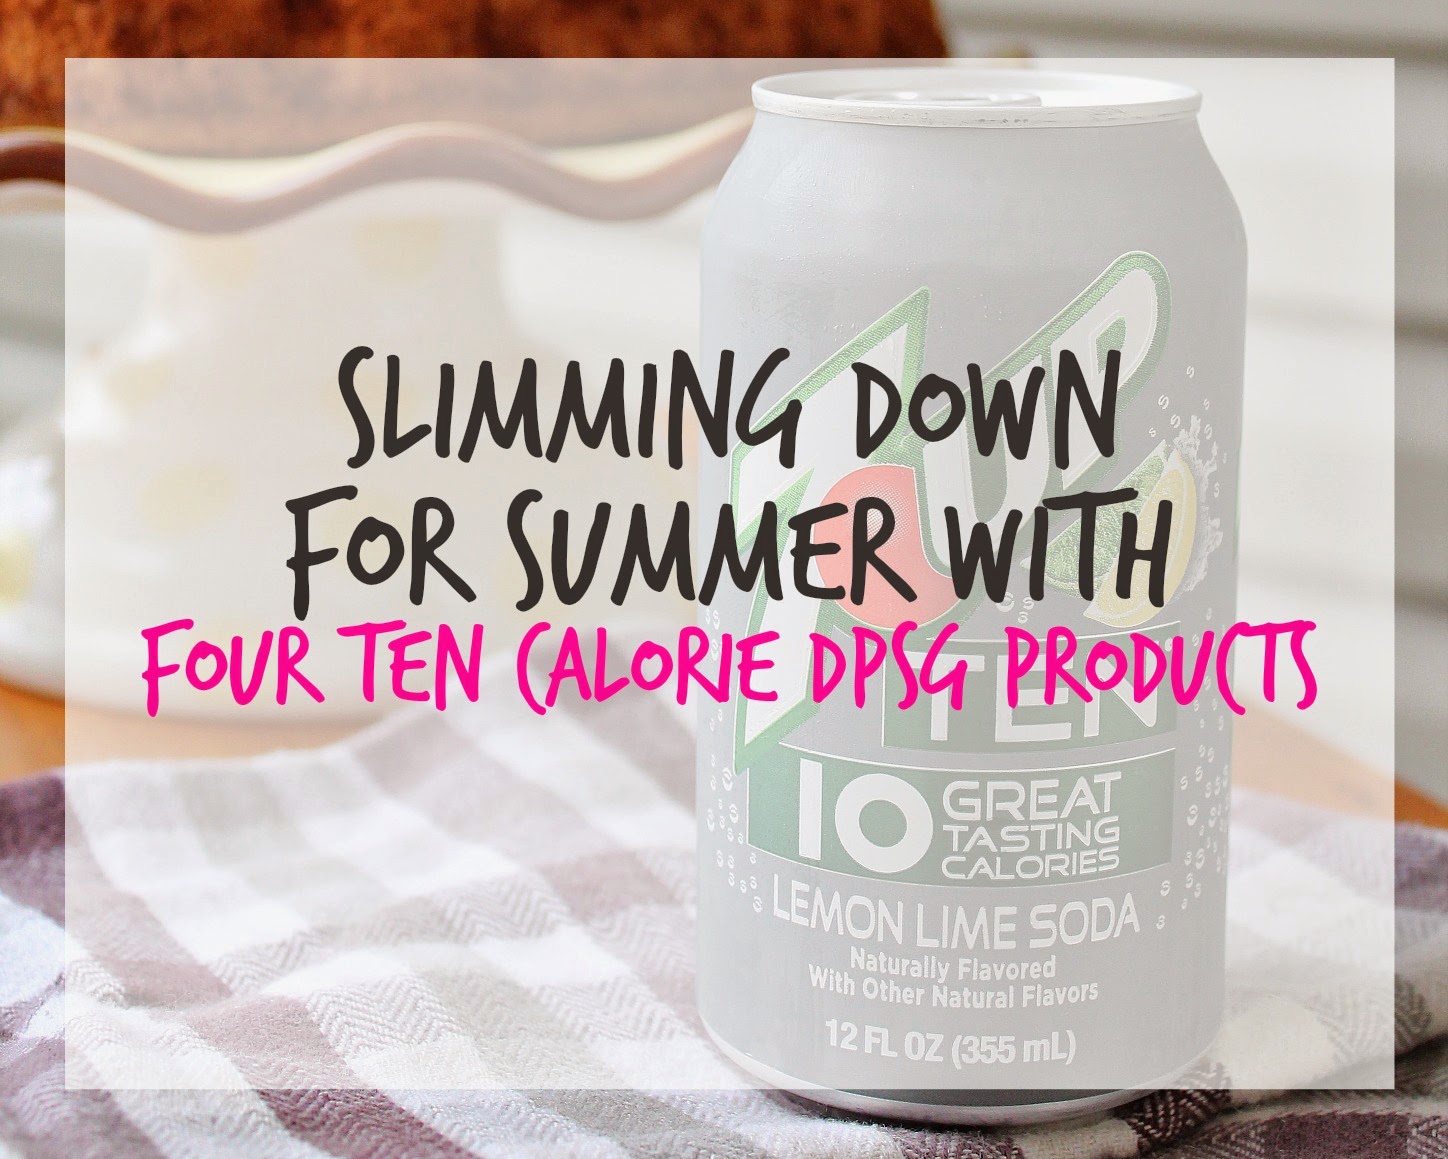 Slimming Down for Summer with DPSG Core Four Ten Products